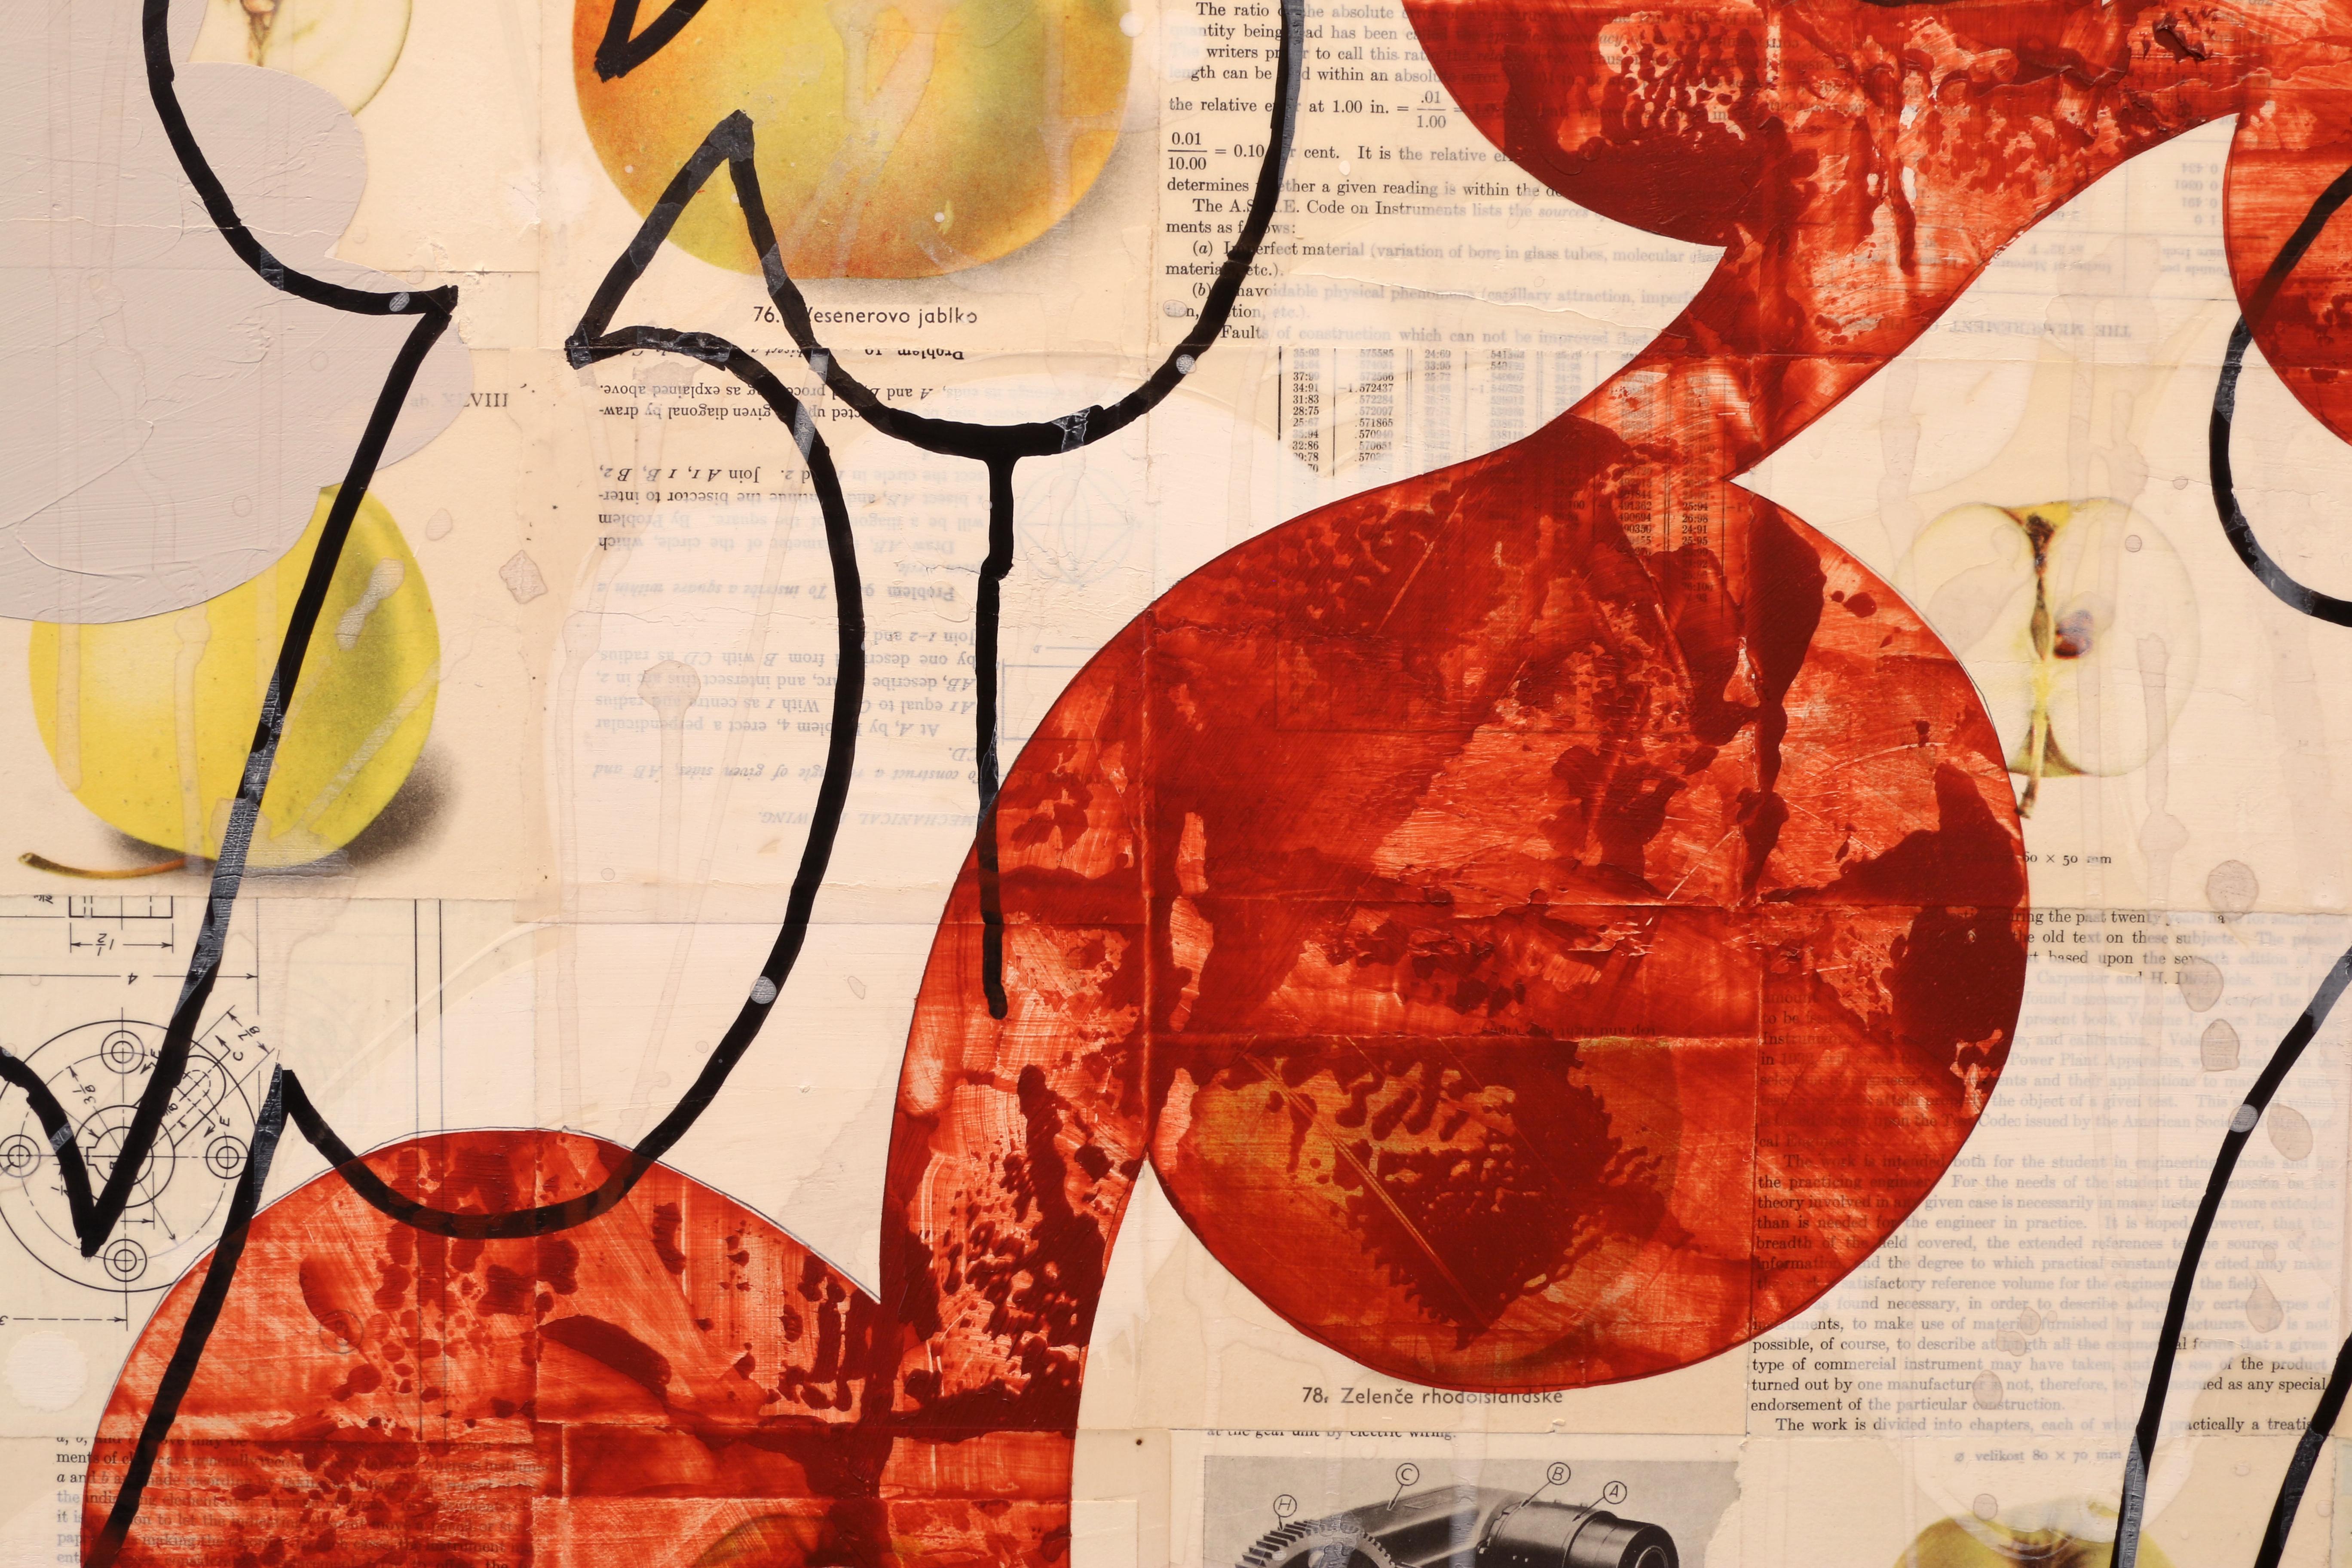 Pyrus Malus II, acrylic, charcoal & found-paper collage on wood panel, 36